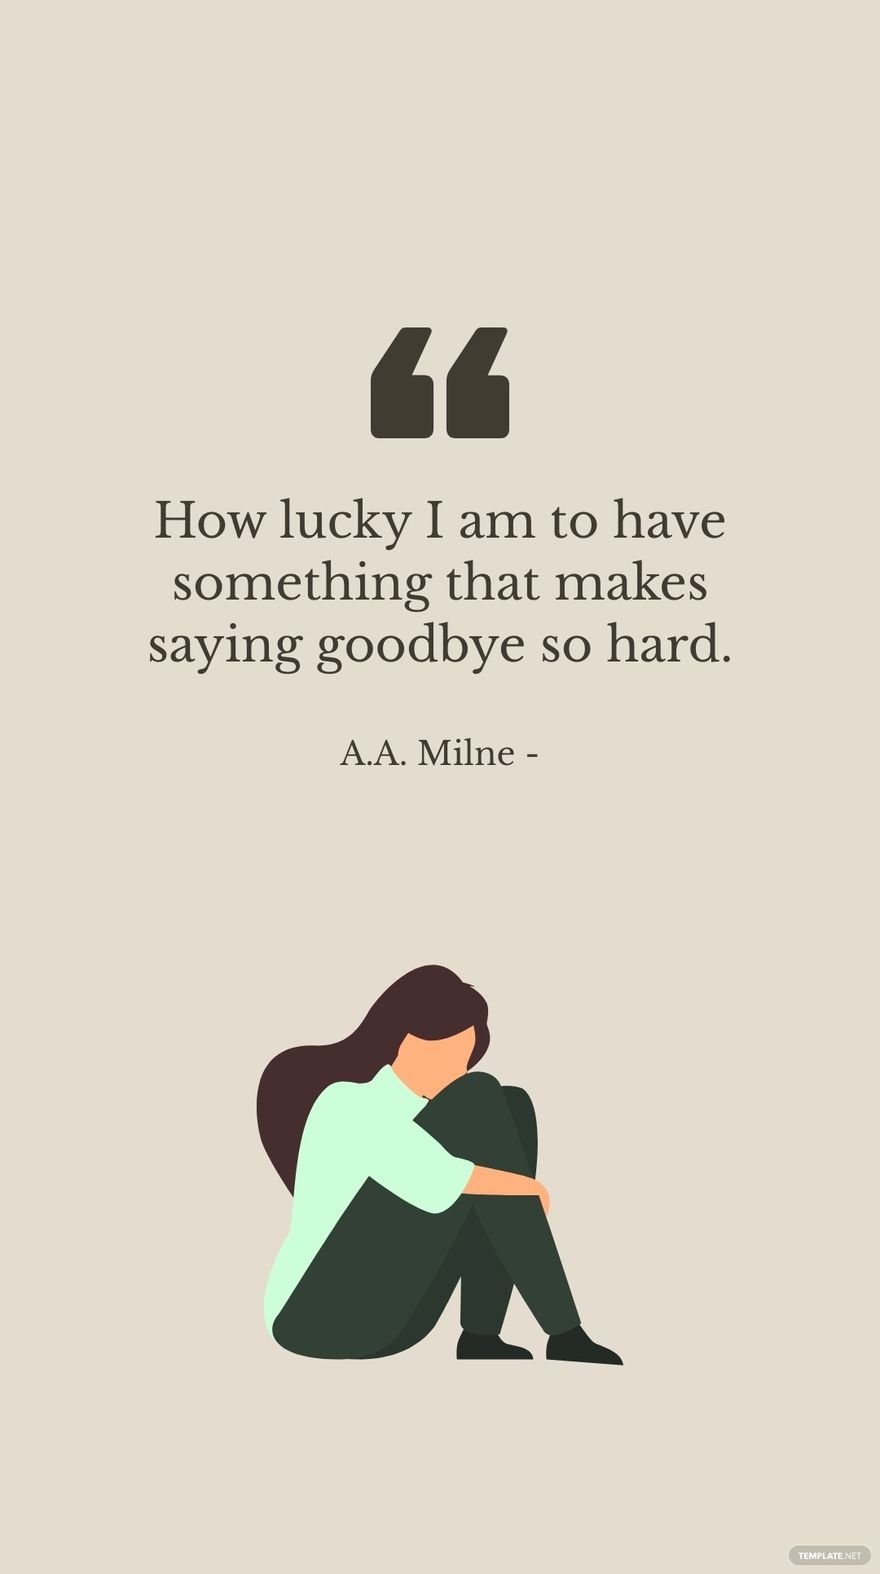 A.A. Milne - How lucky I am to have something that makes saying goodbye so hard.